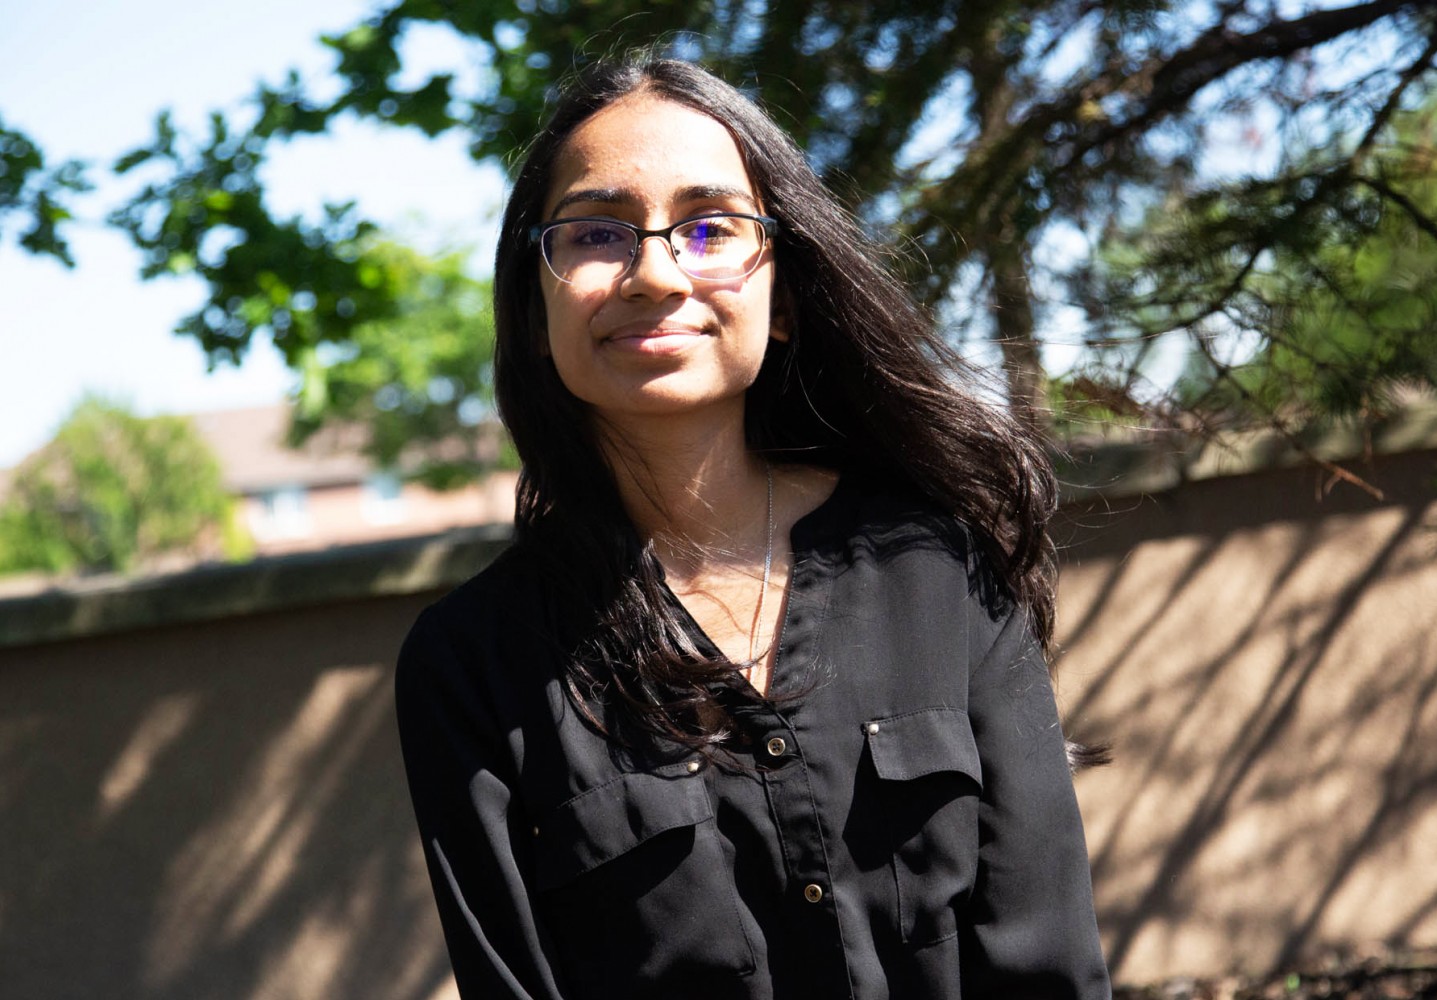 High school student leads charge against climate change in Brampton